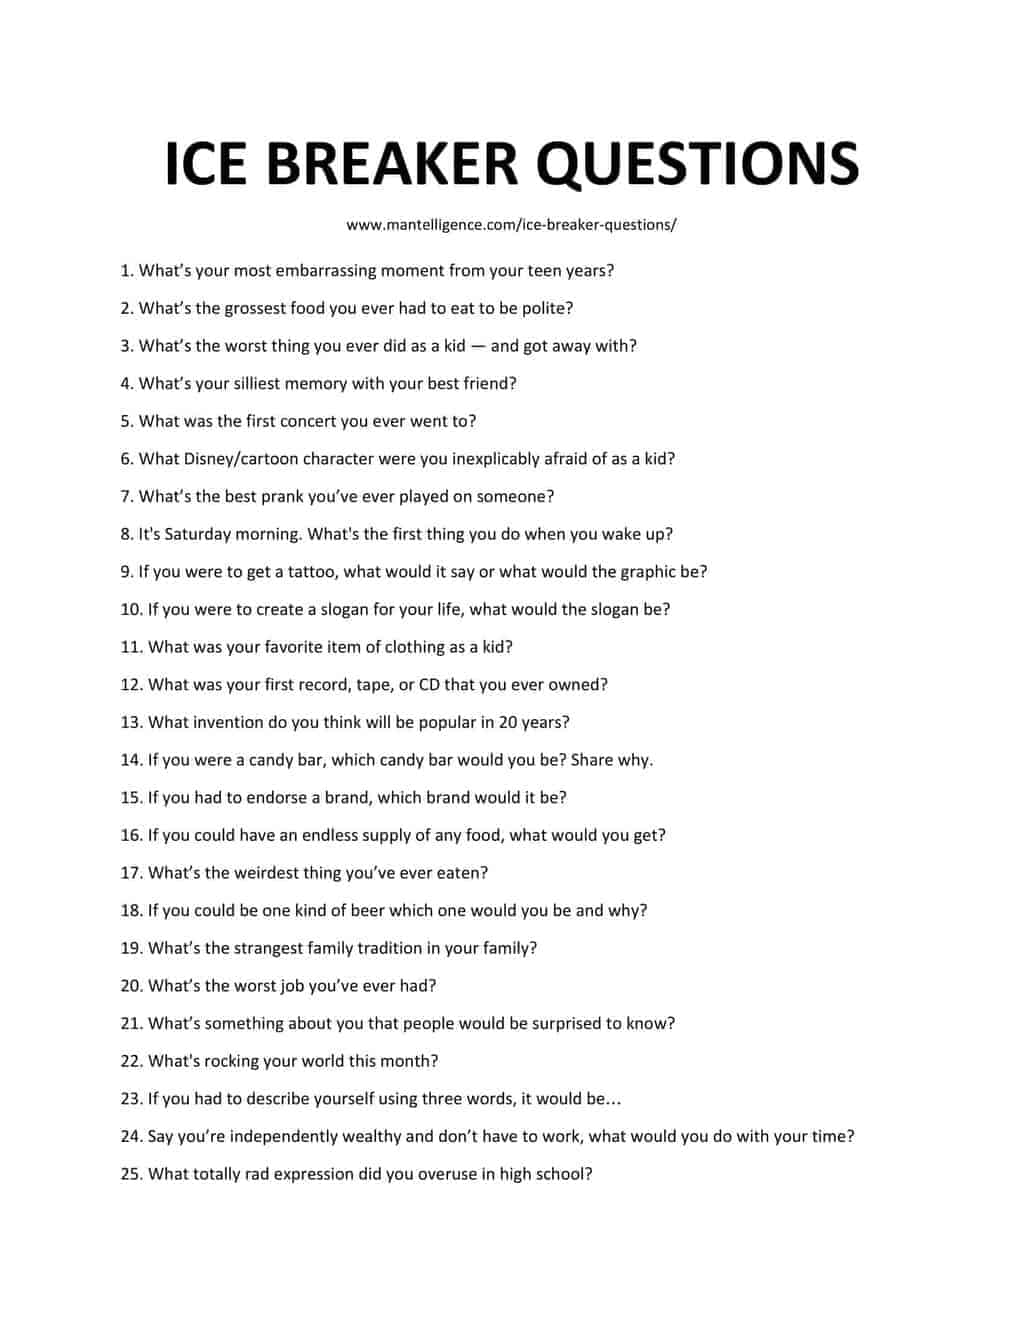 downloadable list of questions